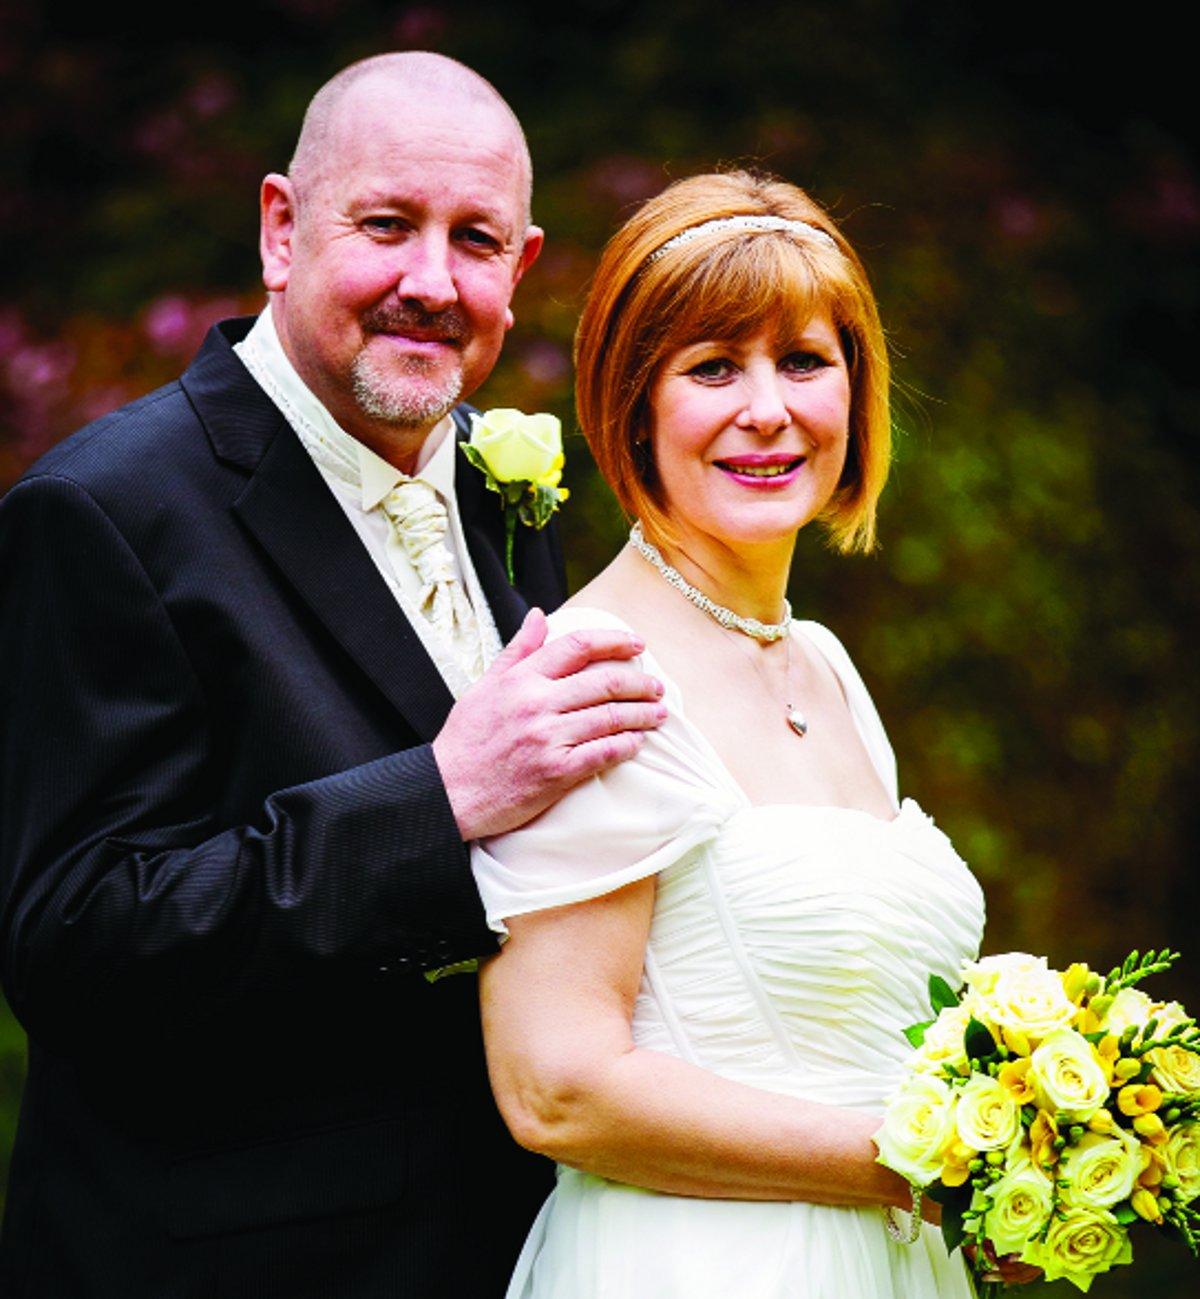 Send us your pictures to pcole@swindonadvertiser.co.uk
n Fiona White and Nigel Lewis were married at the Swindon Marriott Hotel      Picture: Redhouse Photography